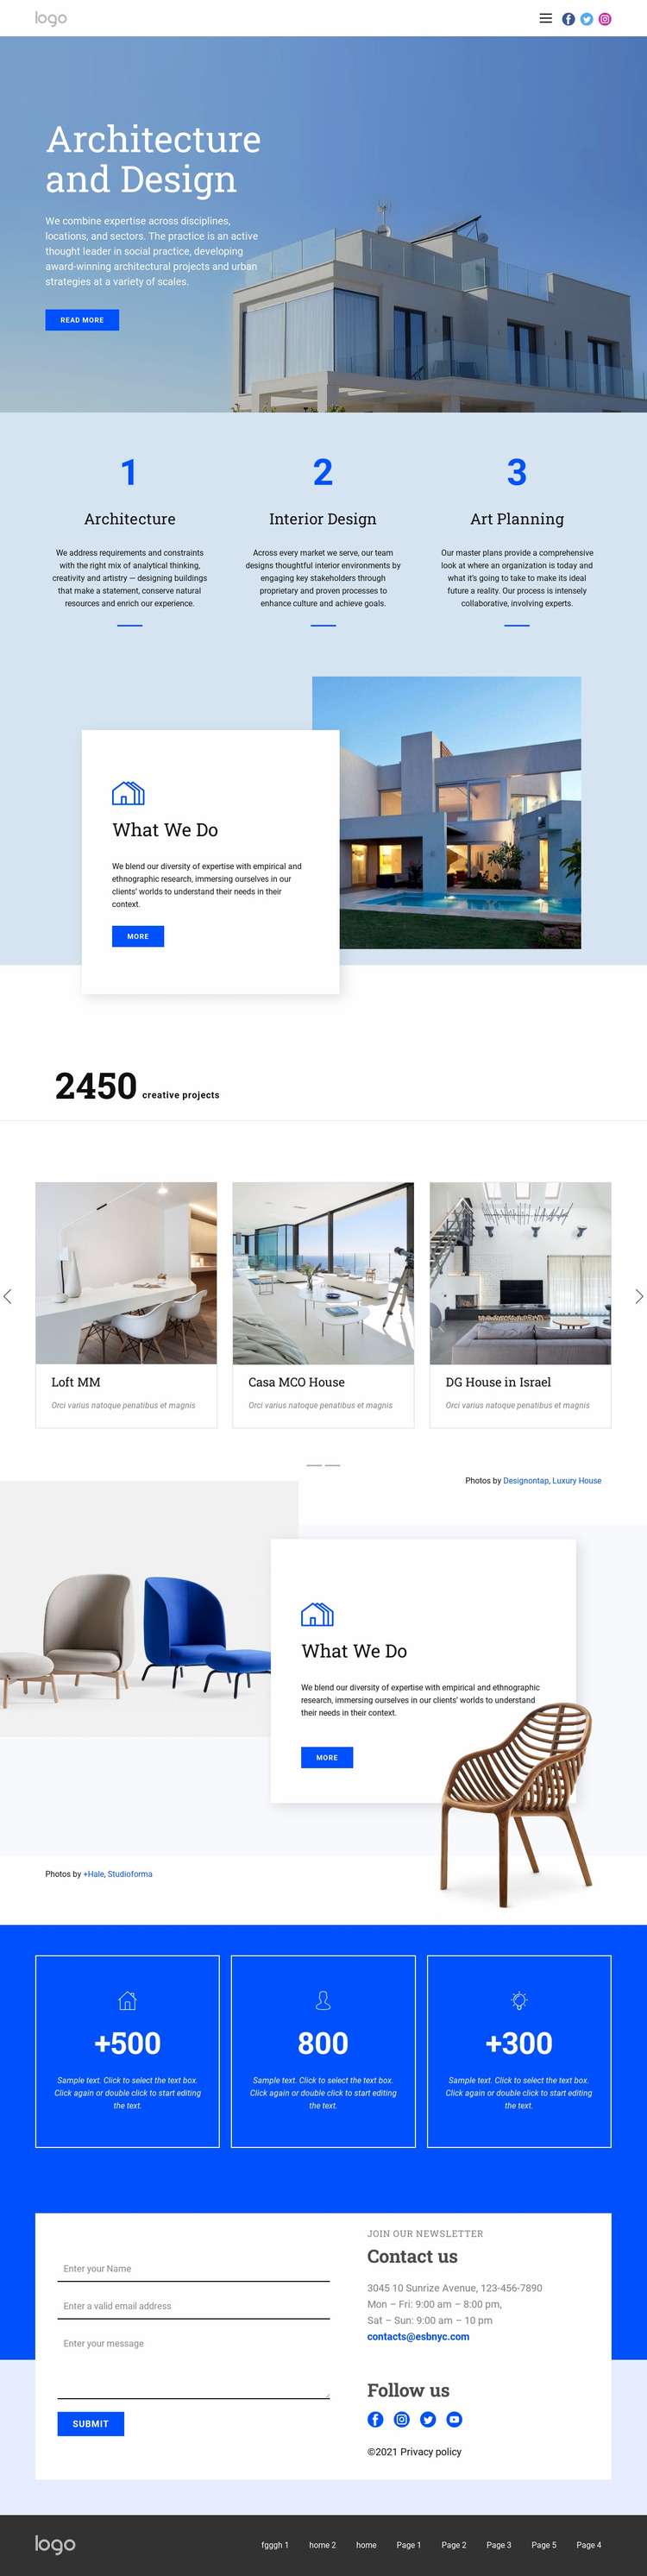 Architecture and design Website Mockup